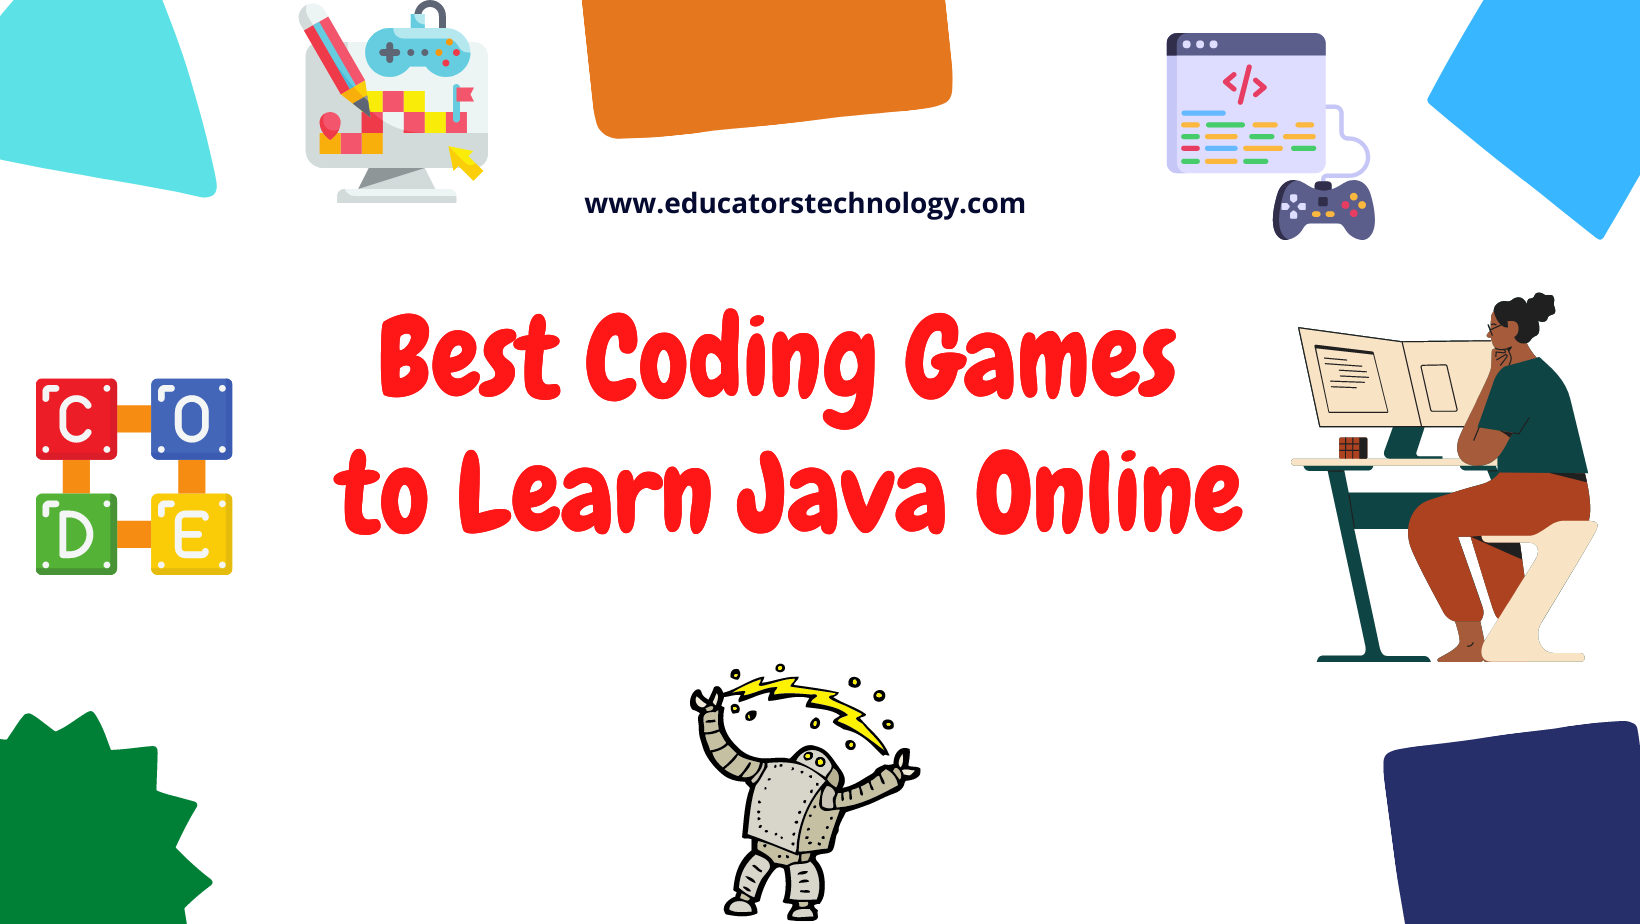 Best coding games to learn Java online